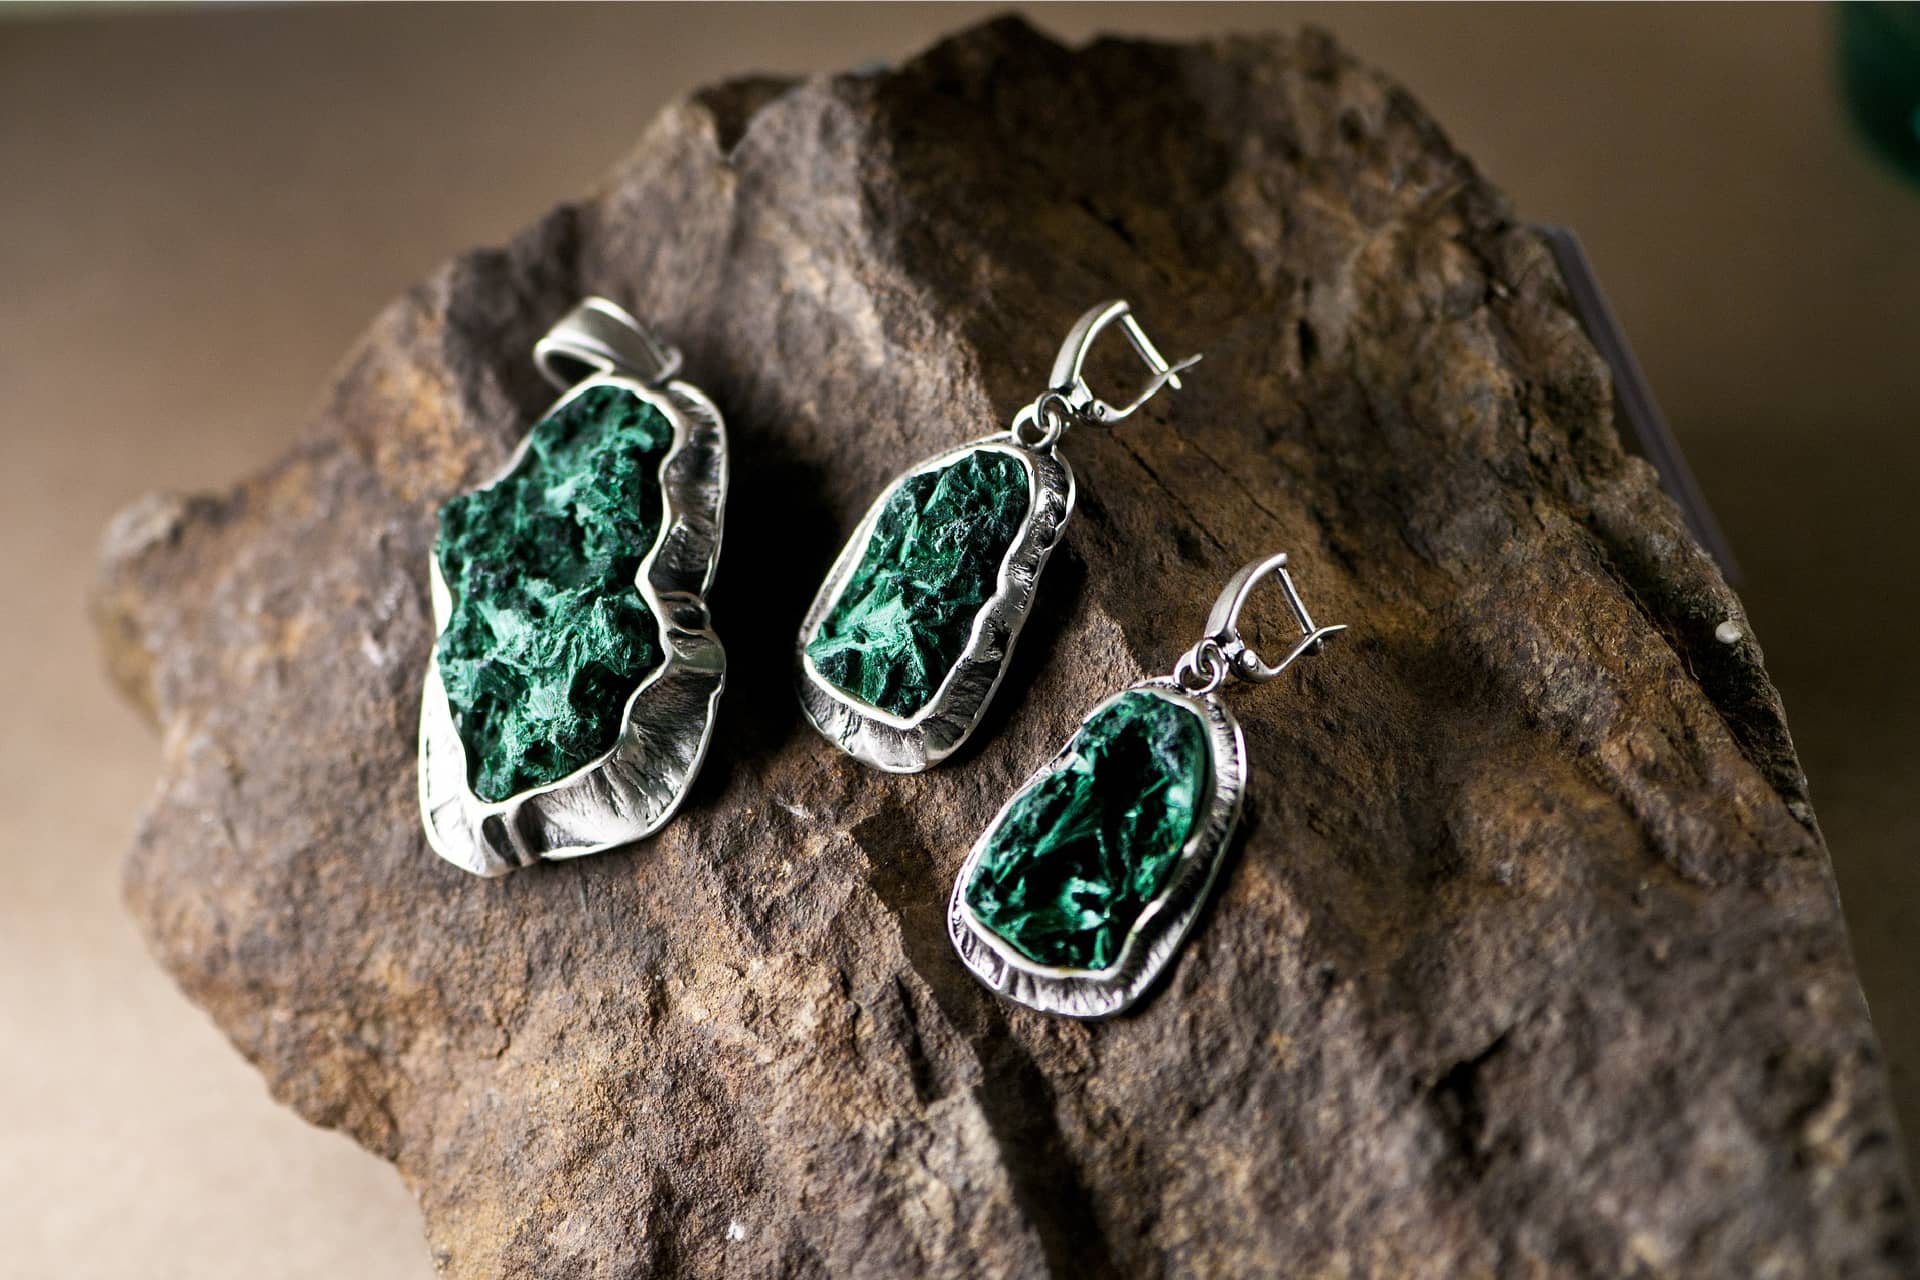 Earrings and a pendant made of emerald